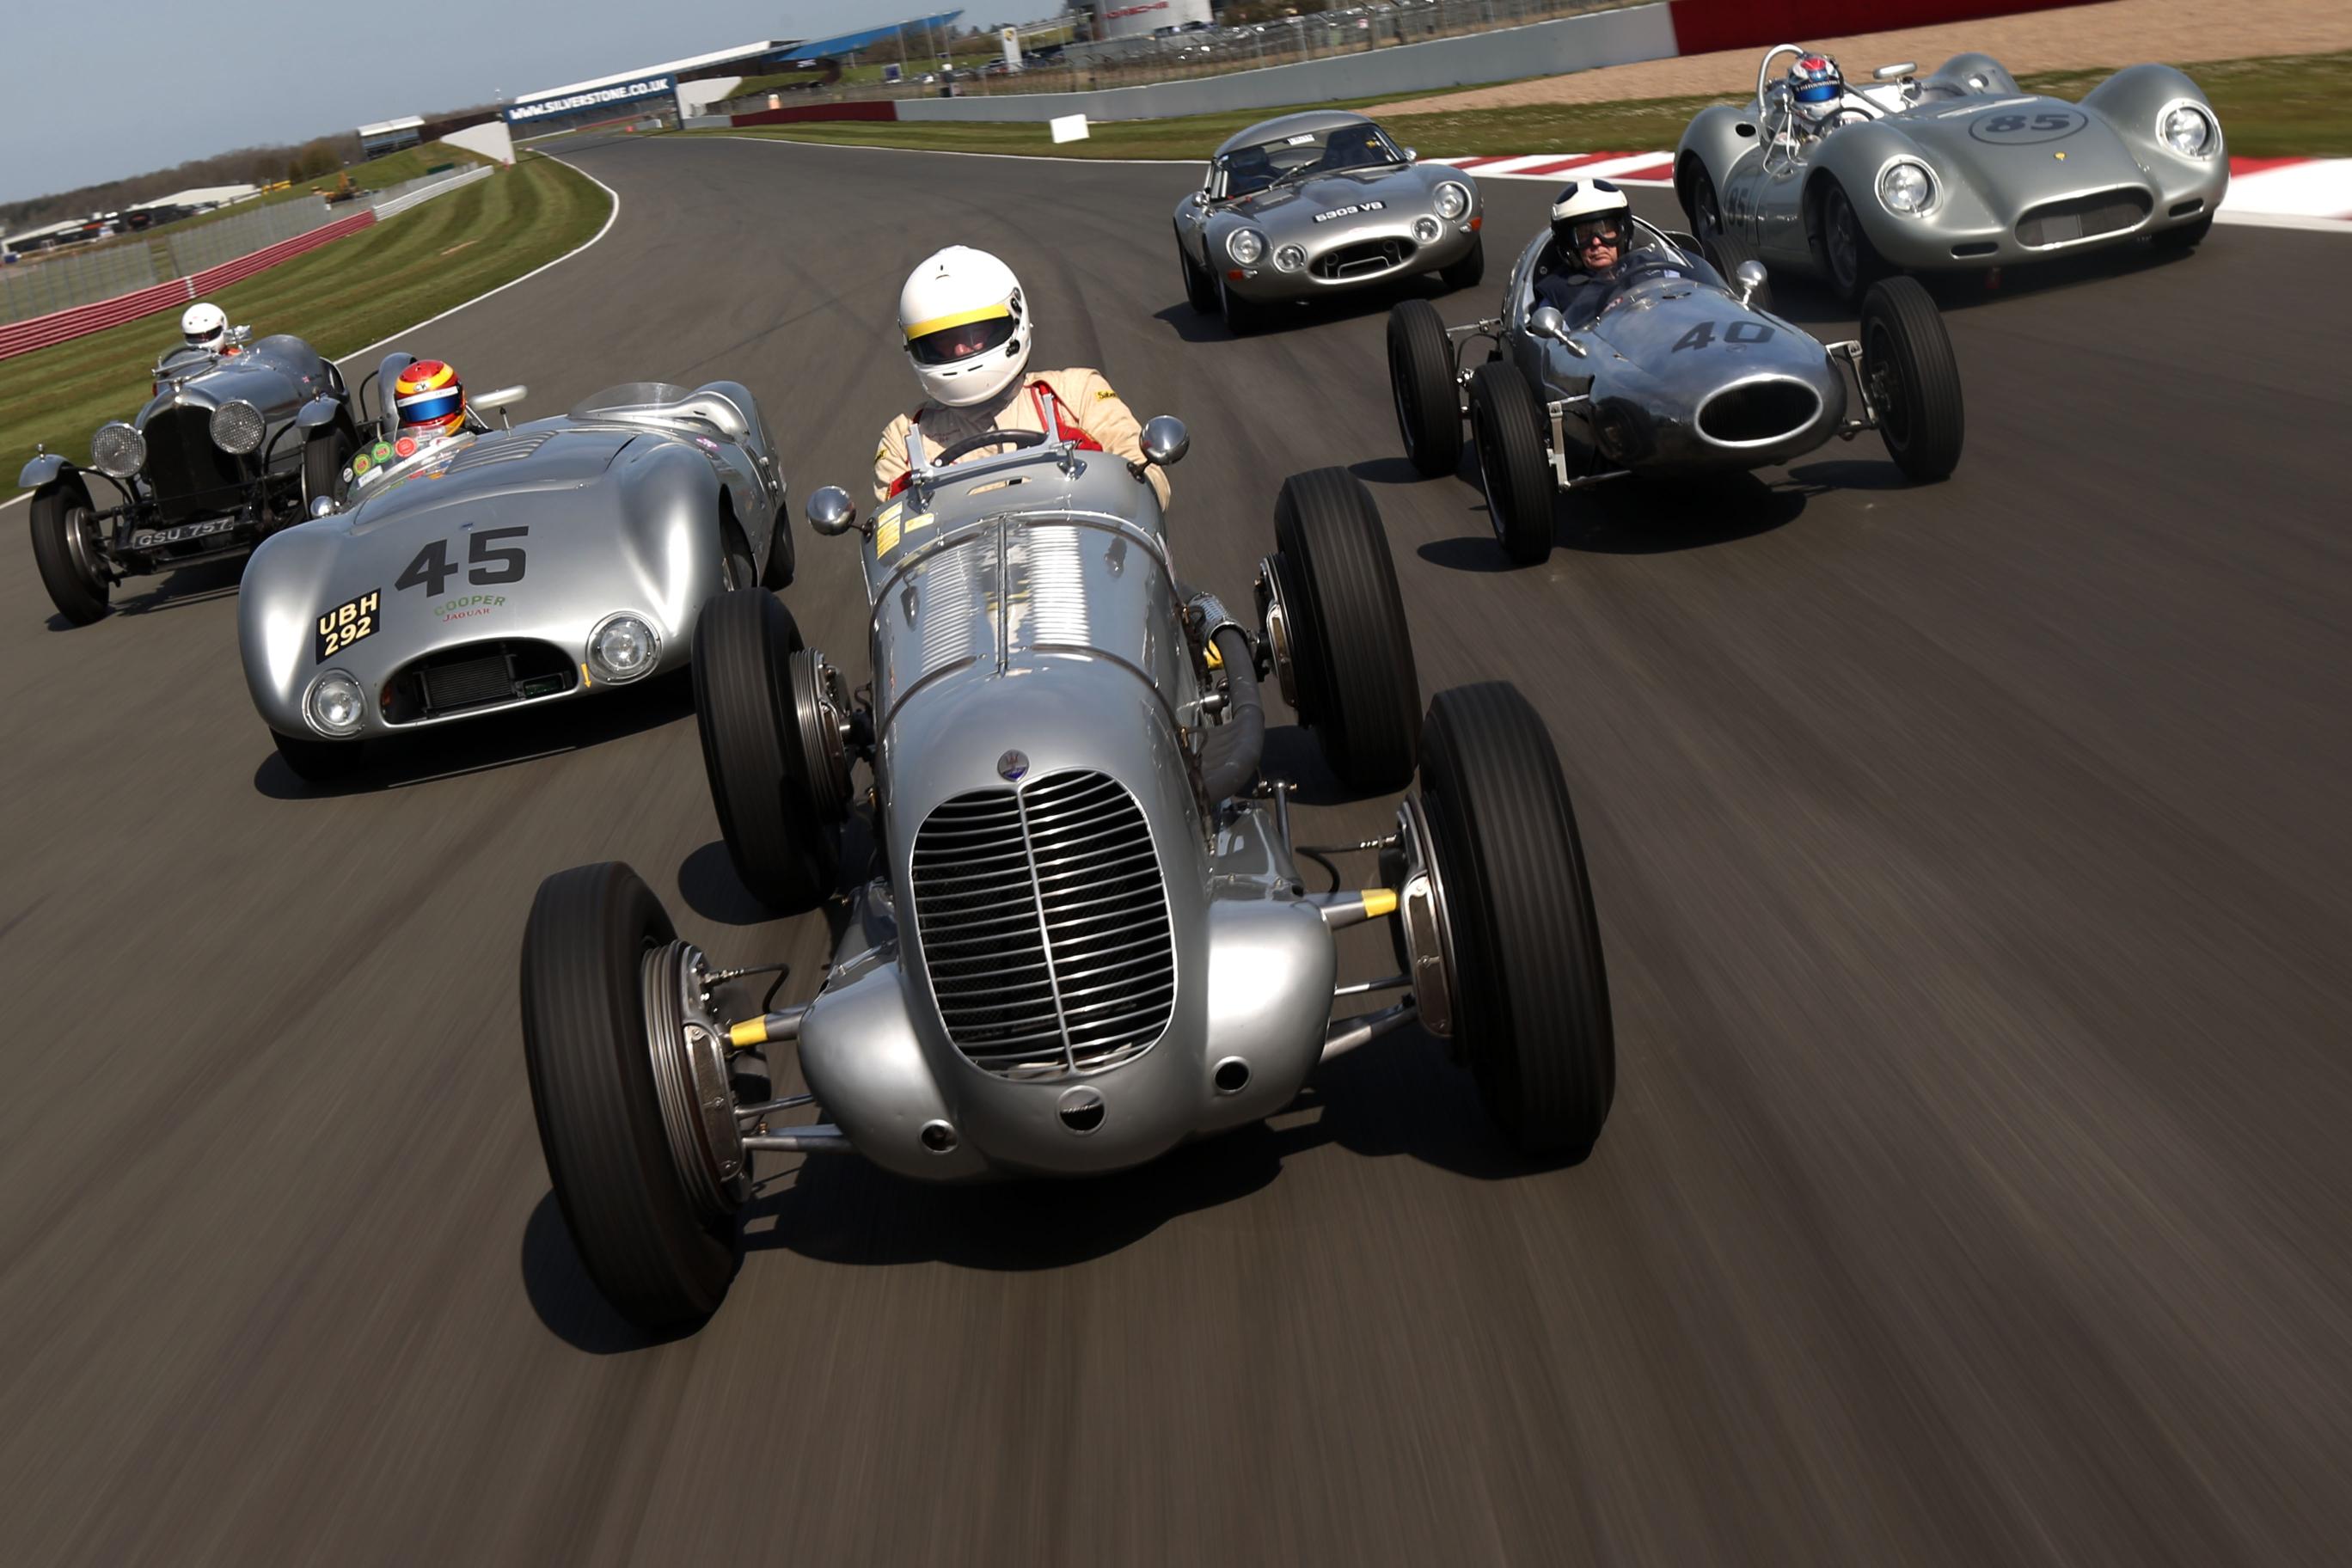 2015 Silverstone Classic revving up to be biggest and best yet